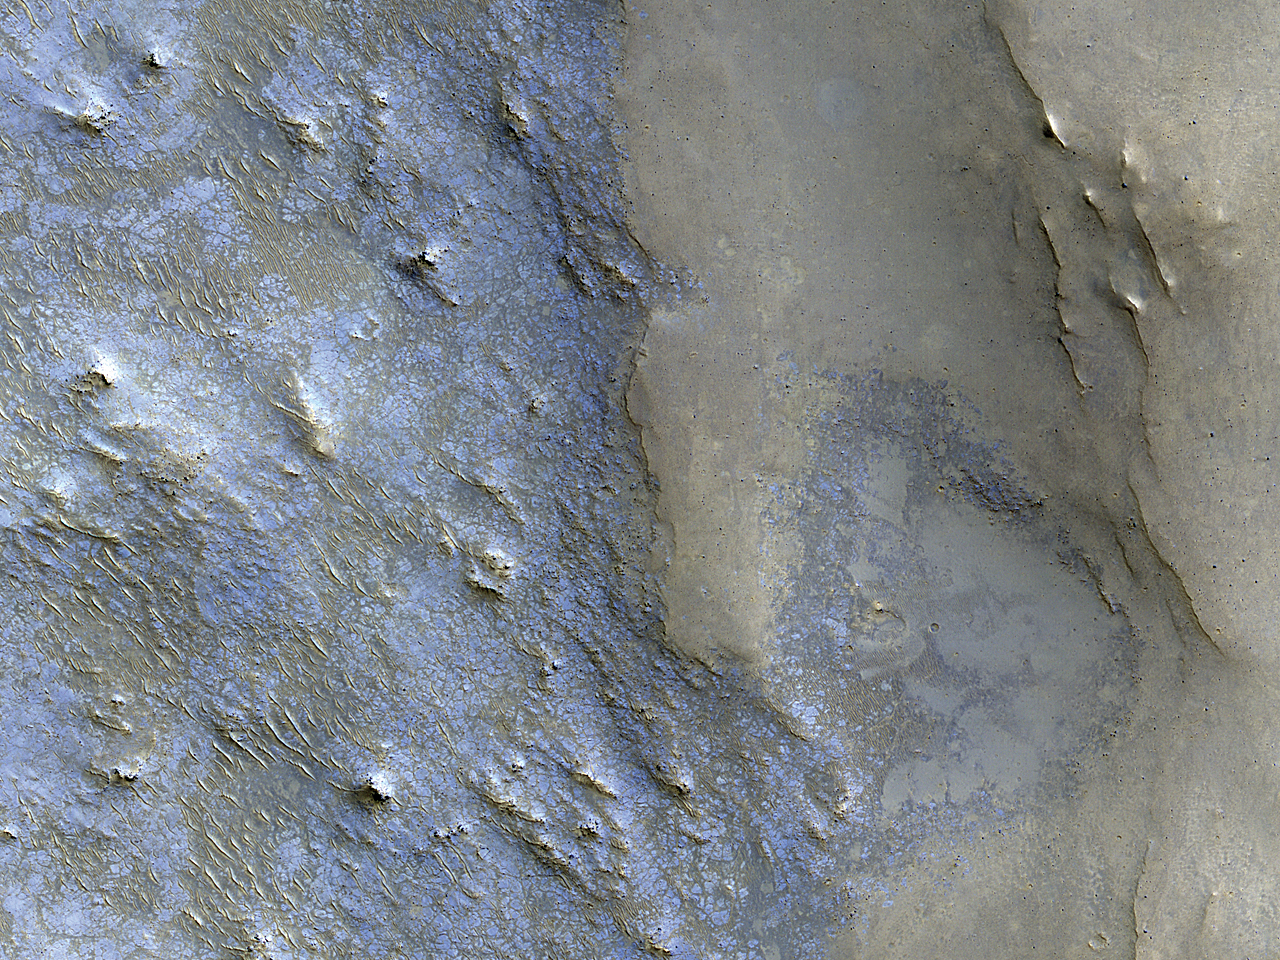 Rocky Ground in Huygens Crater